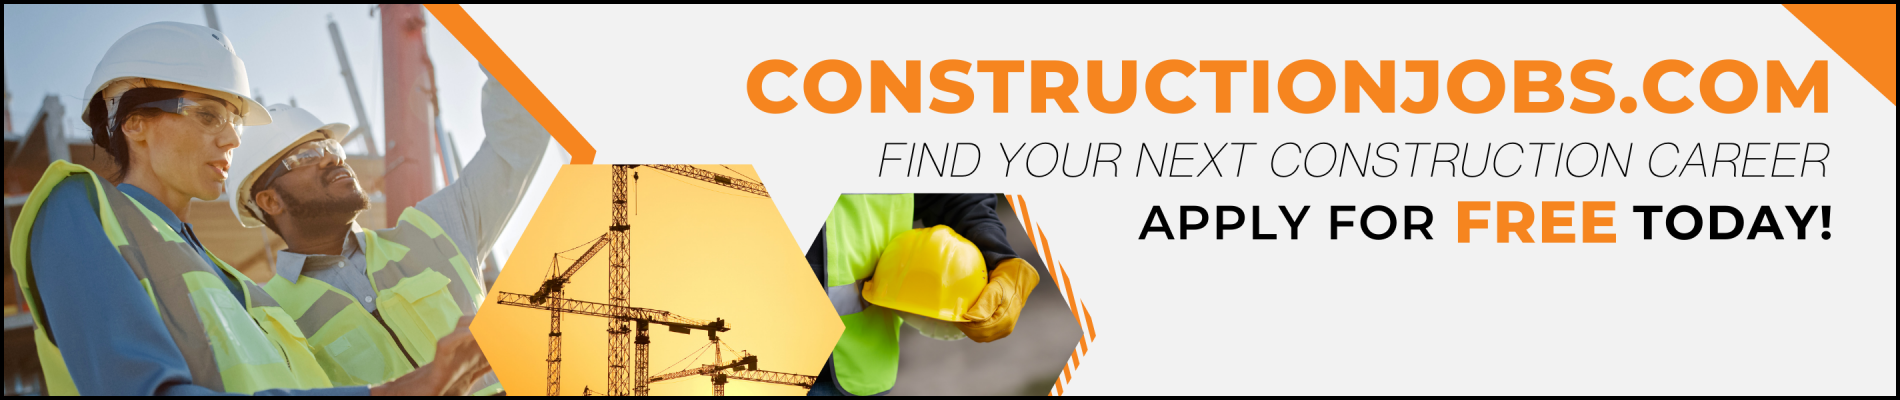 About - ConstructionJobs.com - ConstructionJobs